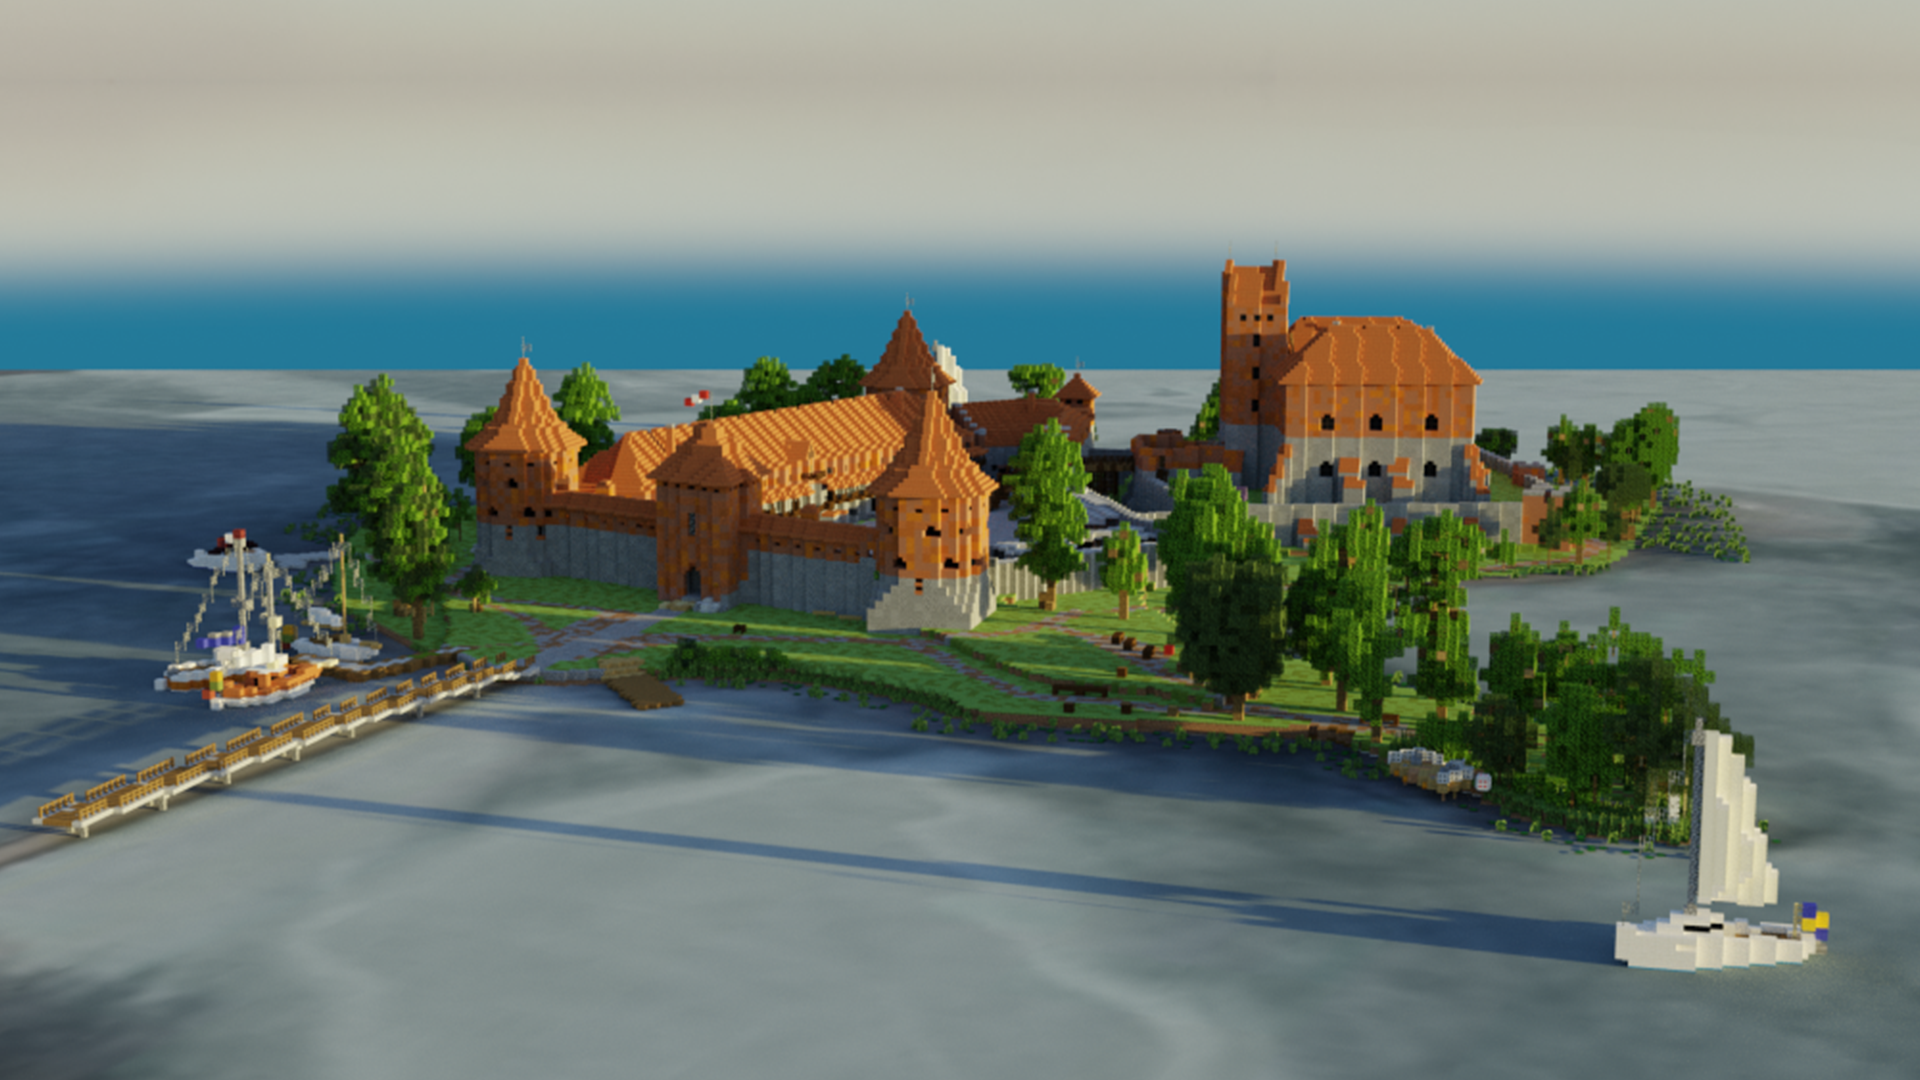 Trakai island castle,Lithuania, built by BTE Nordic+Baltic and BTE Castles, rendered by tomato#7392 by Build The Earth